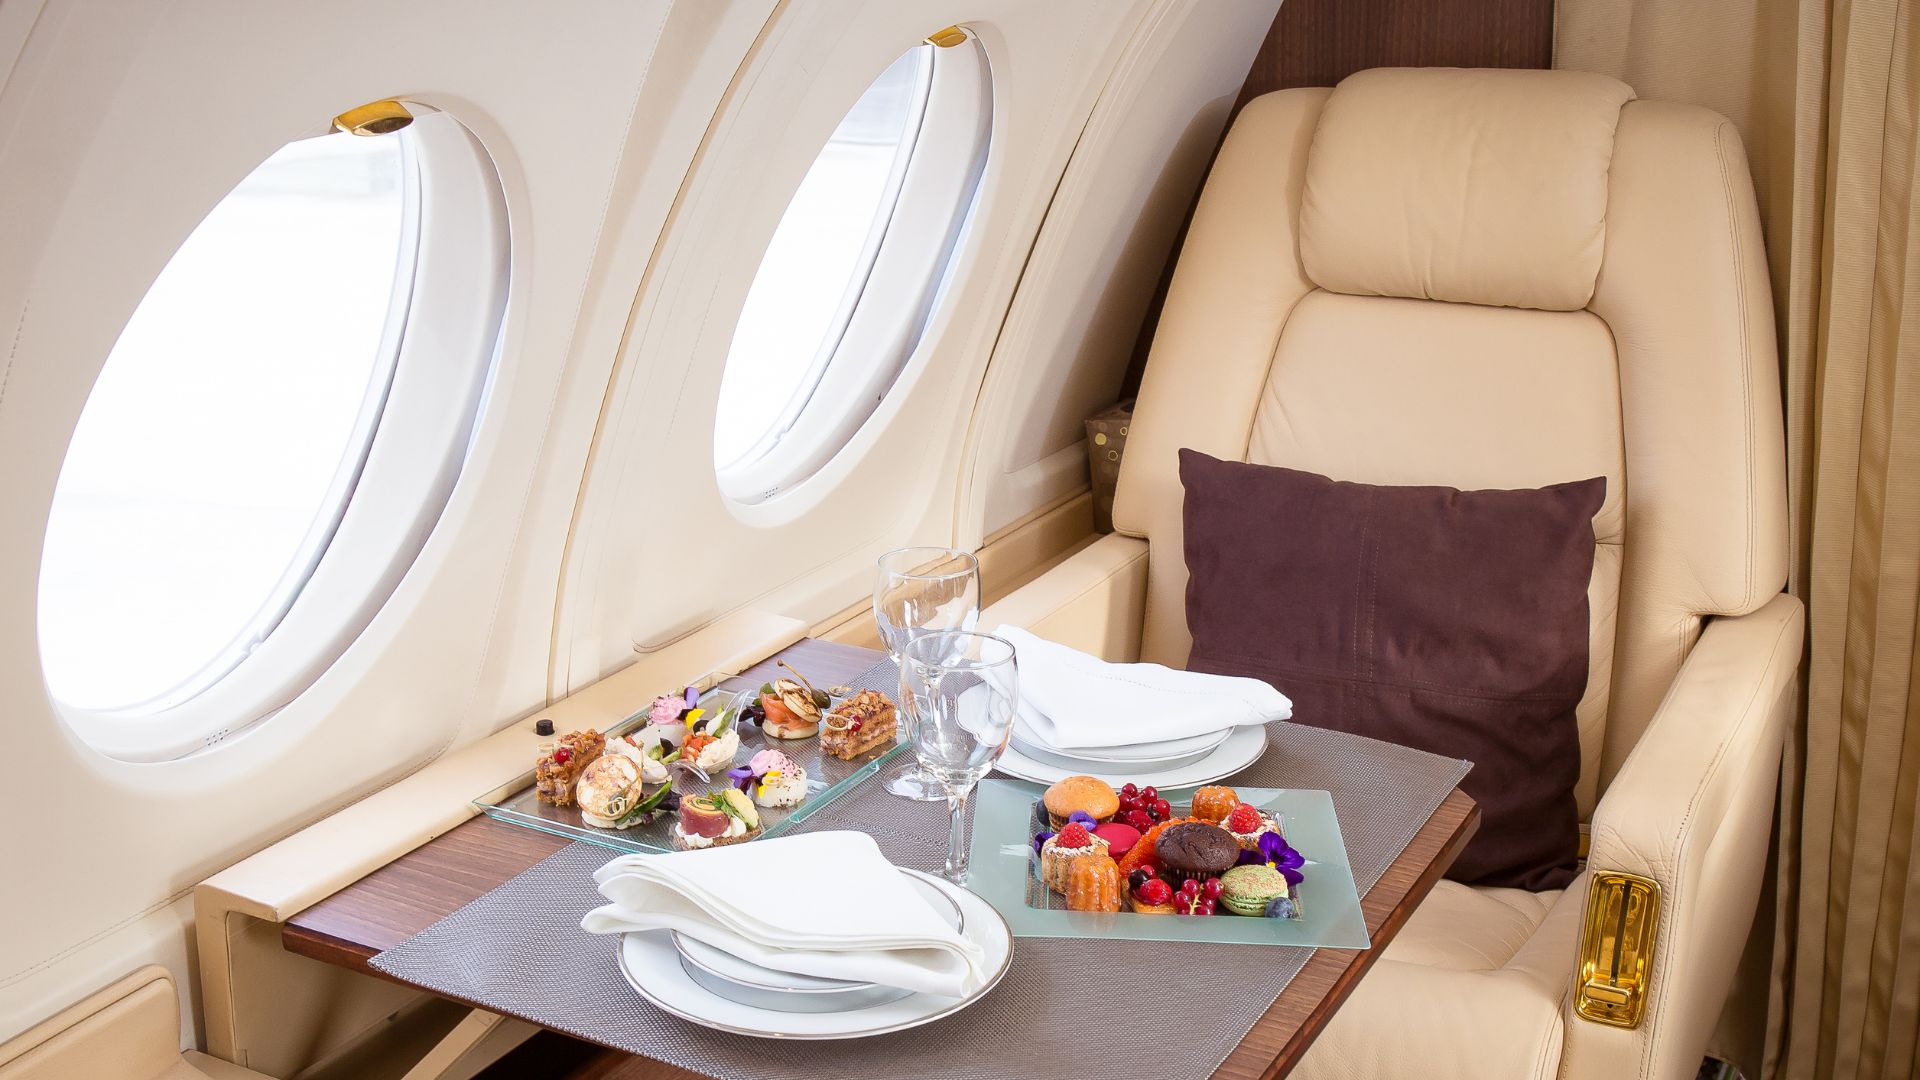 Private Jet Dining: What Сan I Eat and Drink?